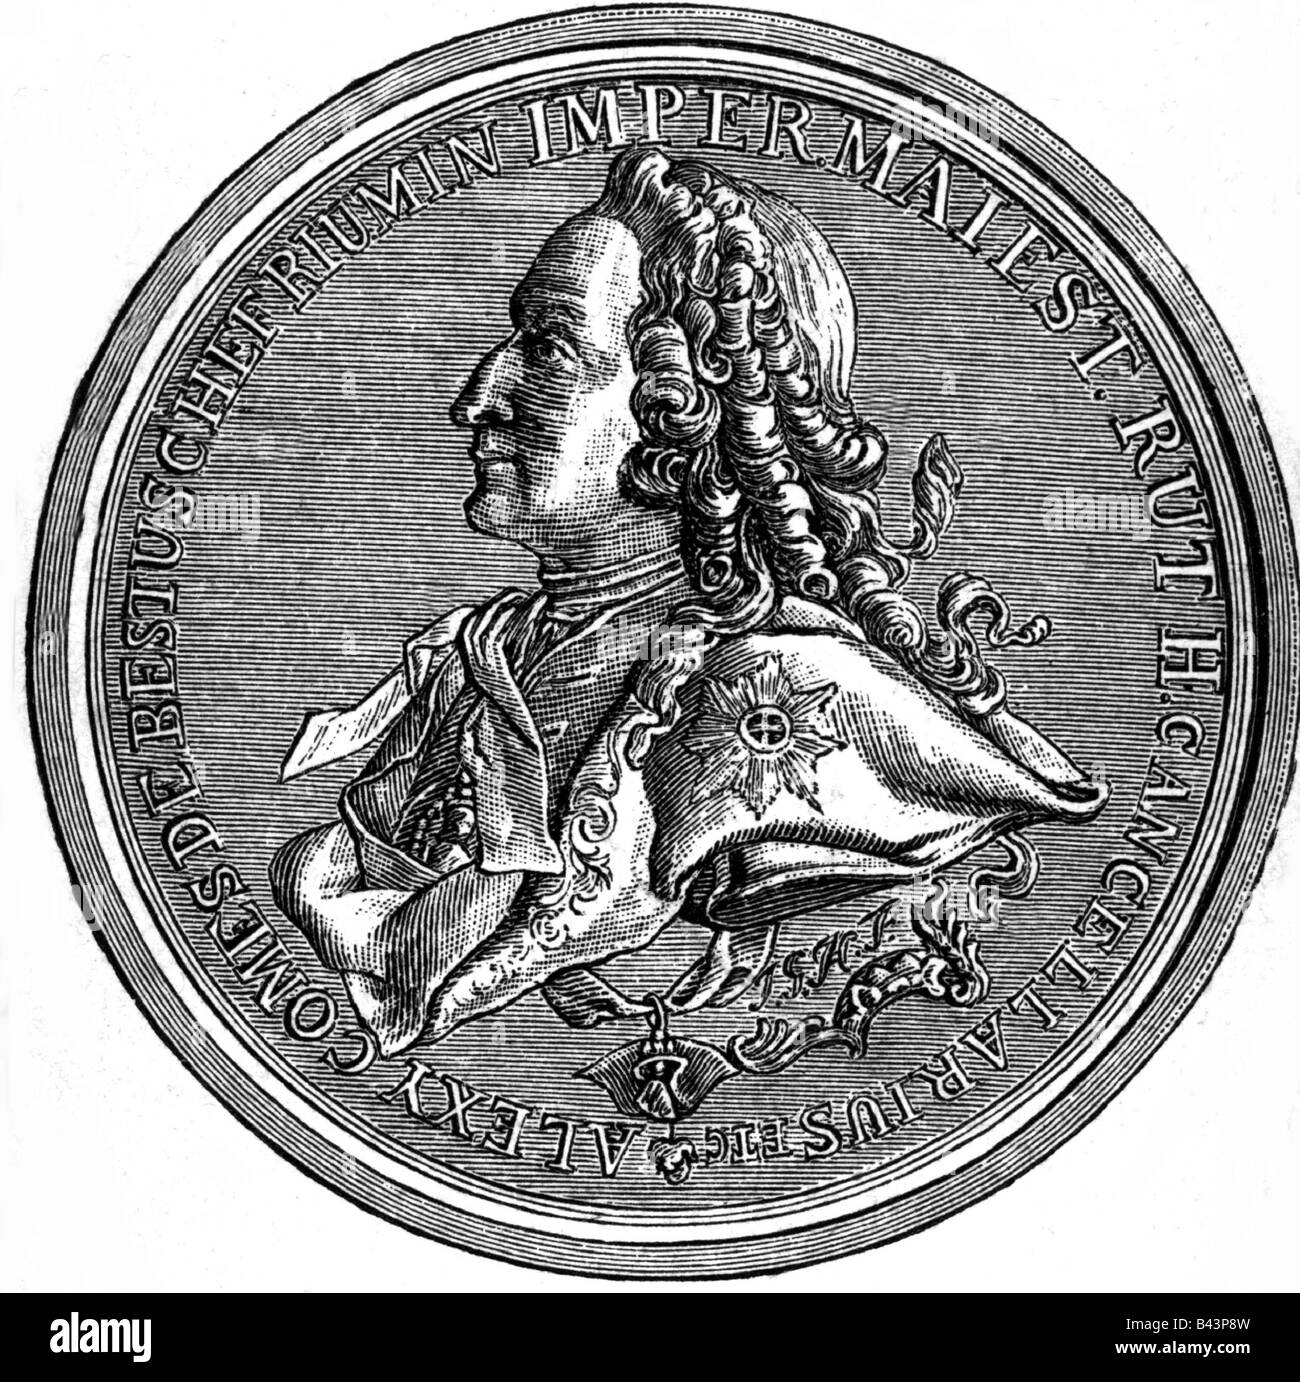 Bestuzhev-Ryumin, Aleksey Petrovich, Count, 2.6.1693 - 21.4.1766, Russian politician, chancellor 1744 - 1758, portrait, xylography after medal, 18th century, Stock Photo